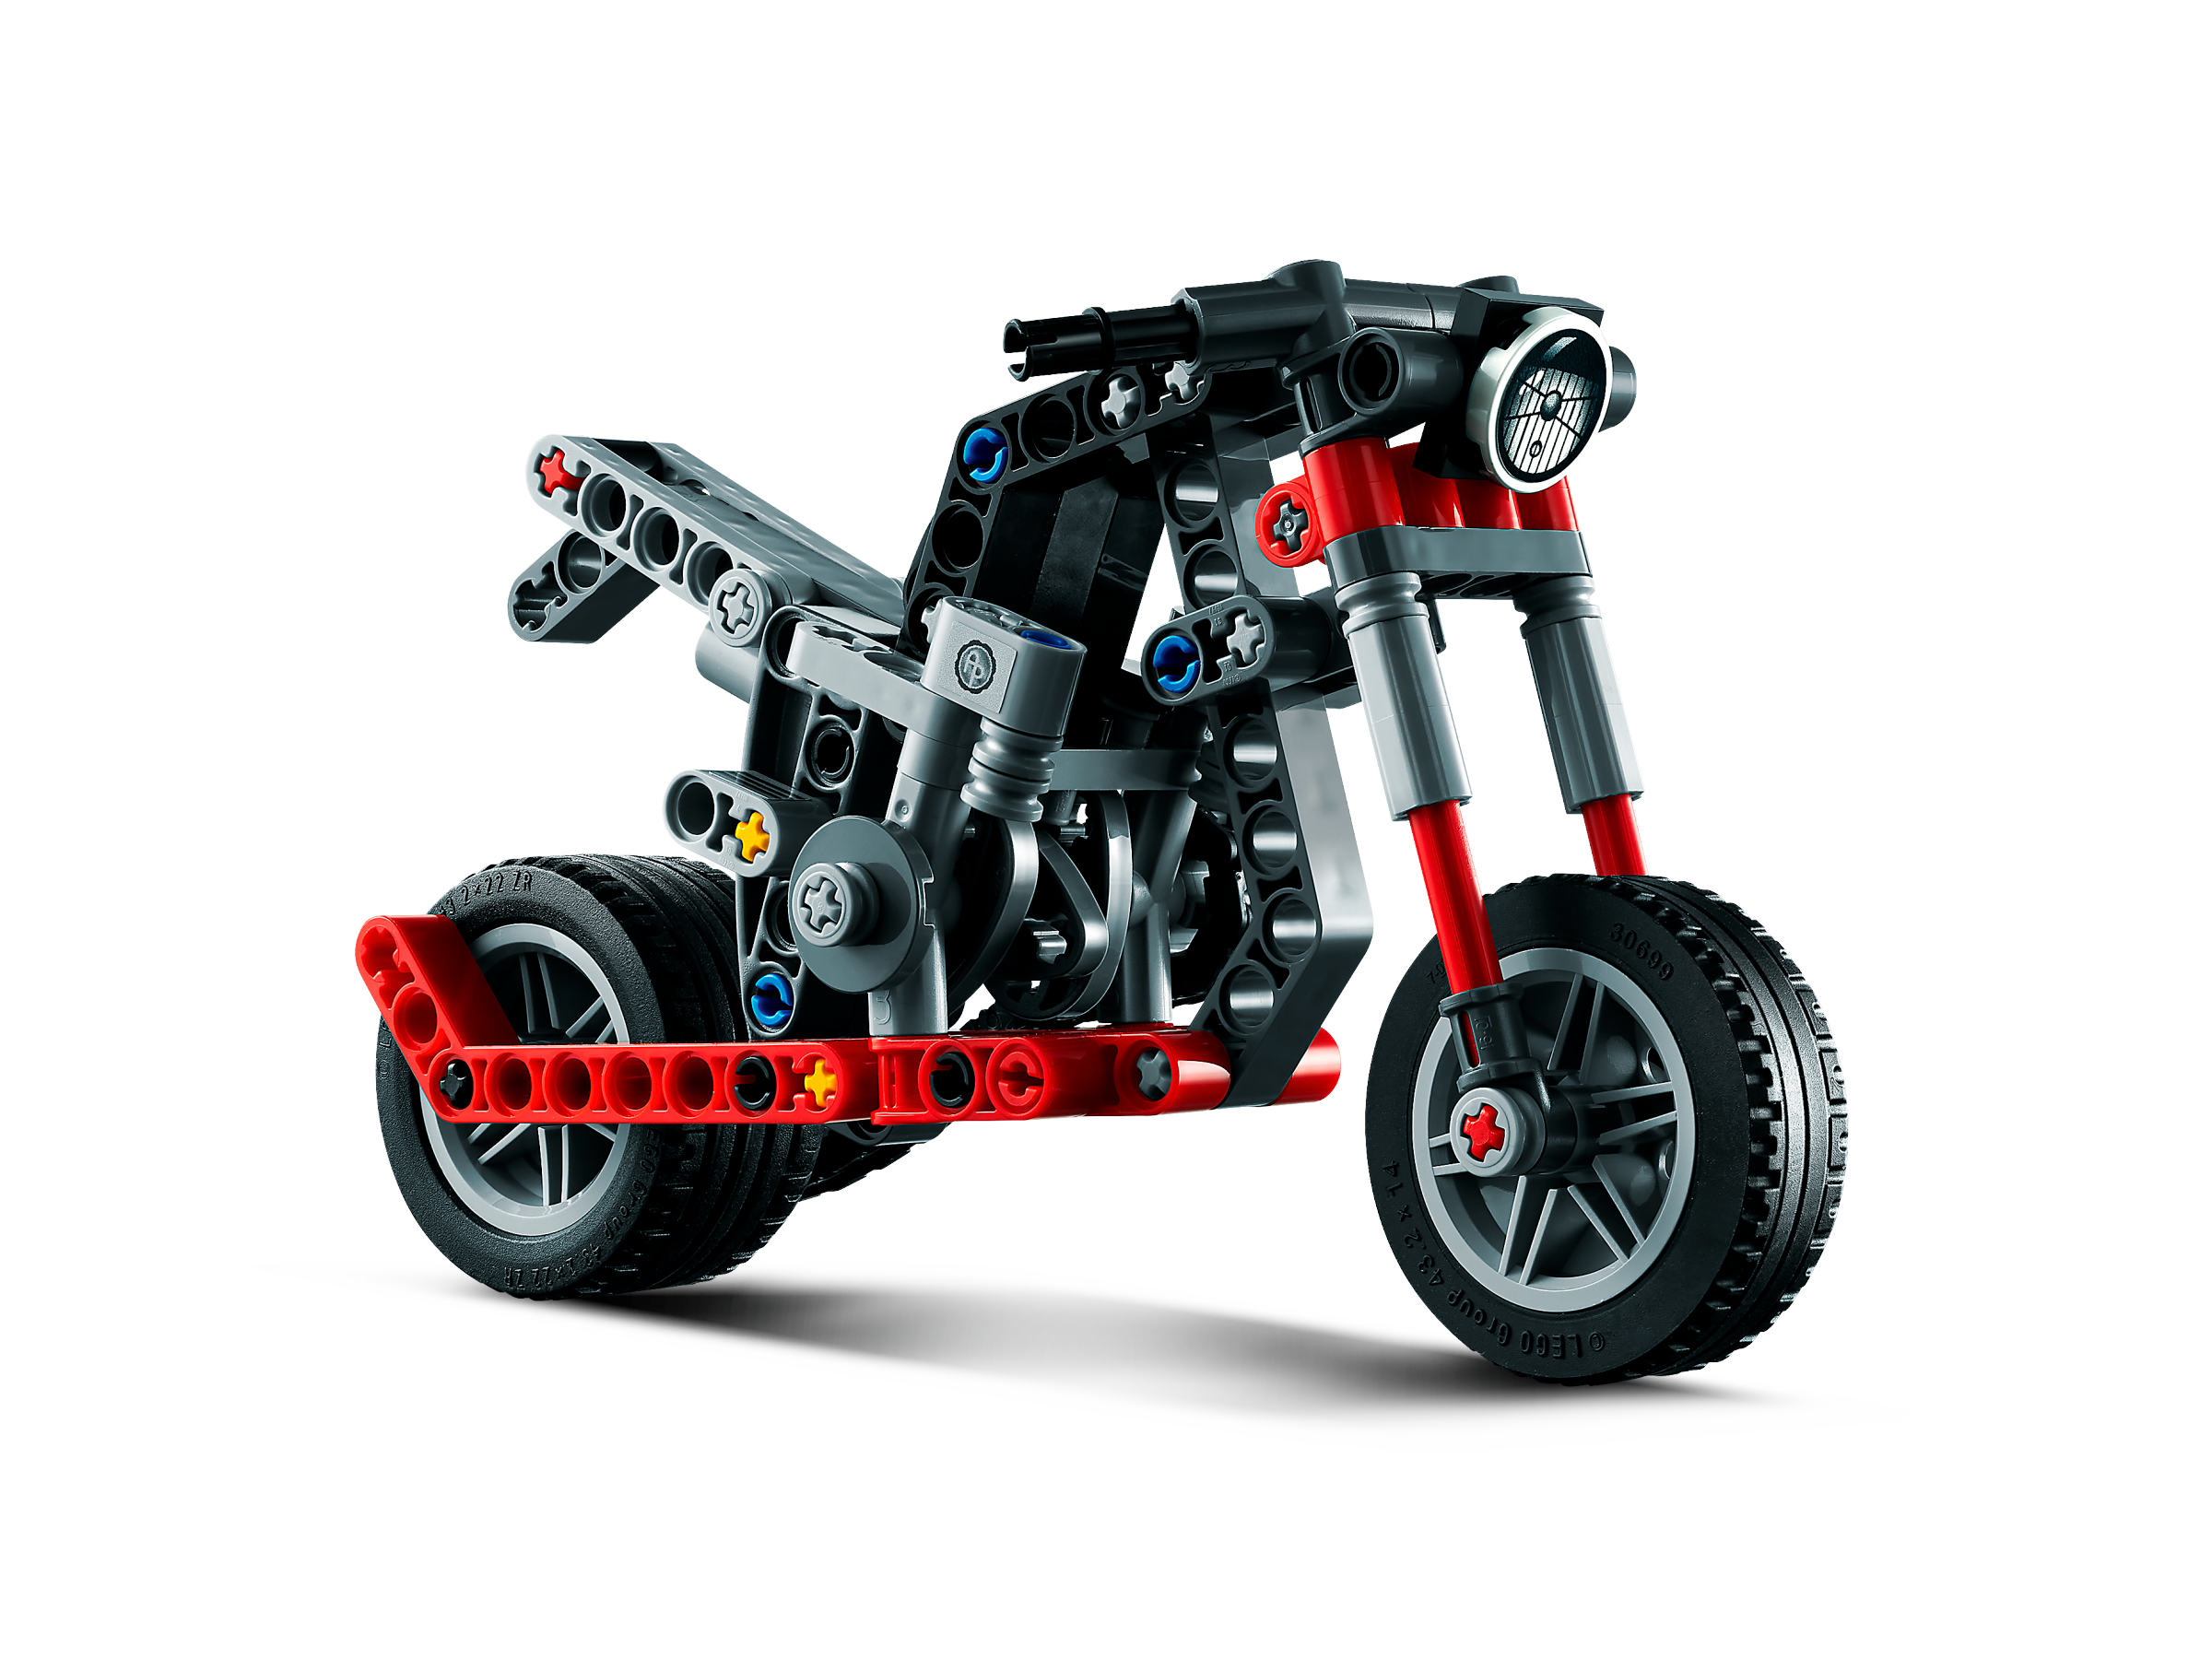 Lego 42132 Technic Motorcycle to Adventure Bike 2 in 1 Model Building Set,  Motorbike Toy, Construction Gift Idea for Kids 7 Year - AliExpress